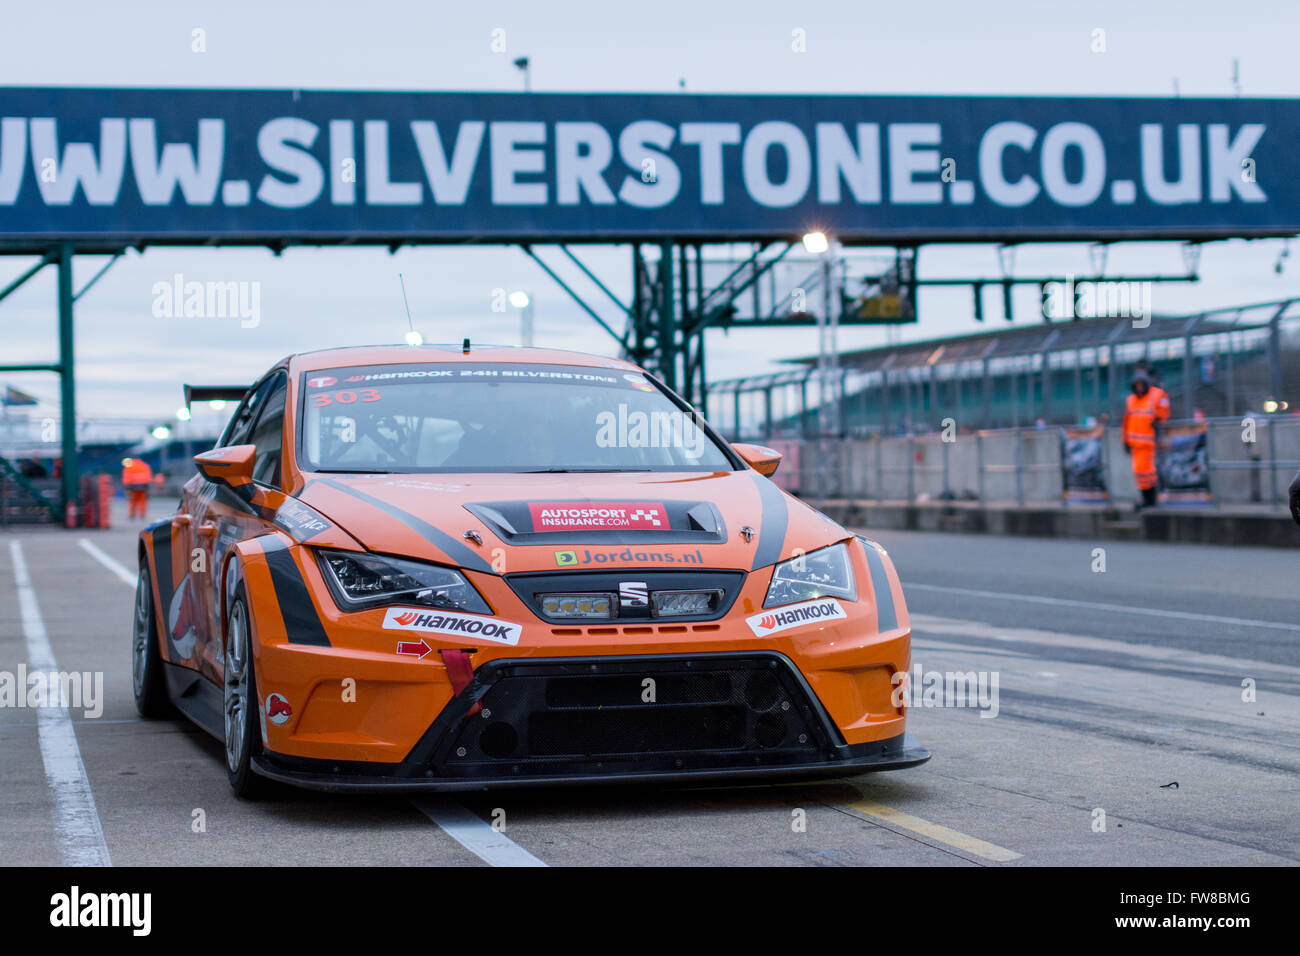 Towcester, Northamptonshire, UK. 1st April, 2016.Red Camel-Jordans.nl Seat Leon EuroCup Racer in the pits during Night Practice of the Hankook 24 Hours Touring Car Series at Silverstone Circuit (Photo by Gergo Toth / Alamy Live News) Stock Photo